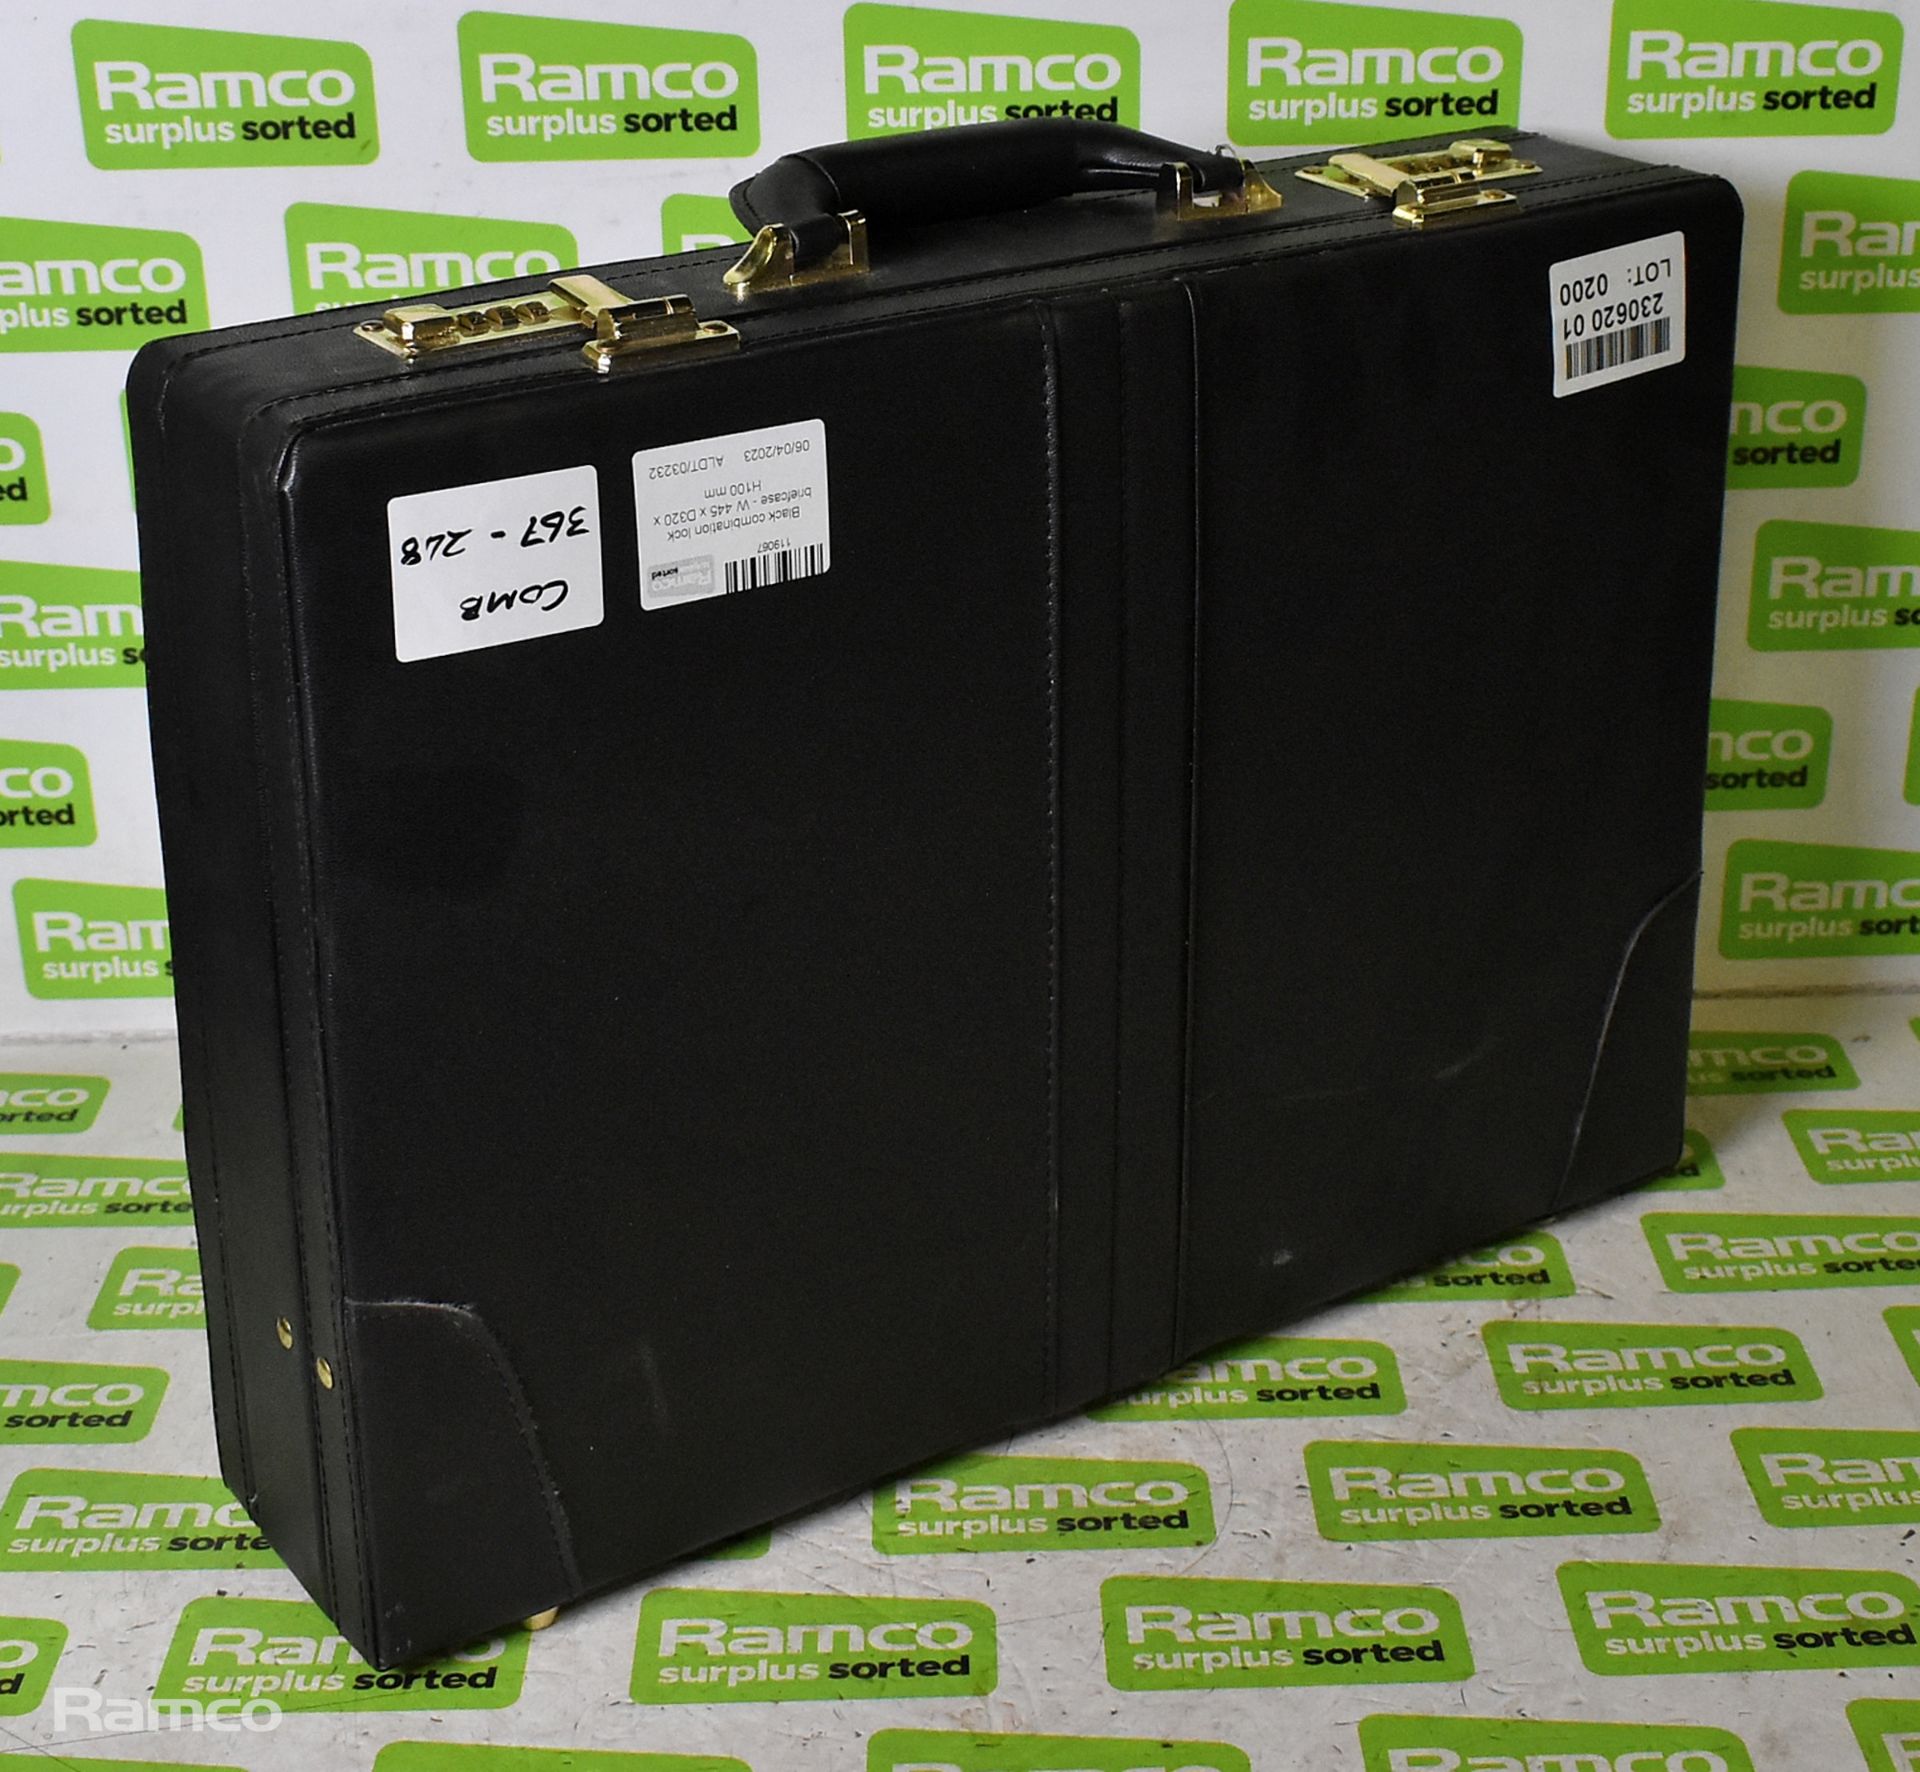 2x Black combination lock briefcases - W 445 x D320 x H100 mm - Image 5 of 5